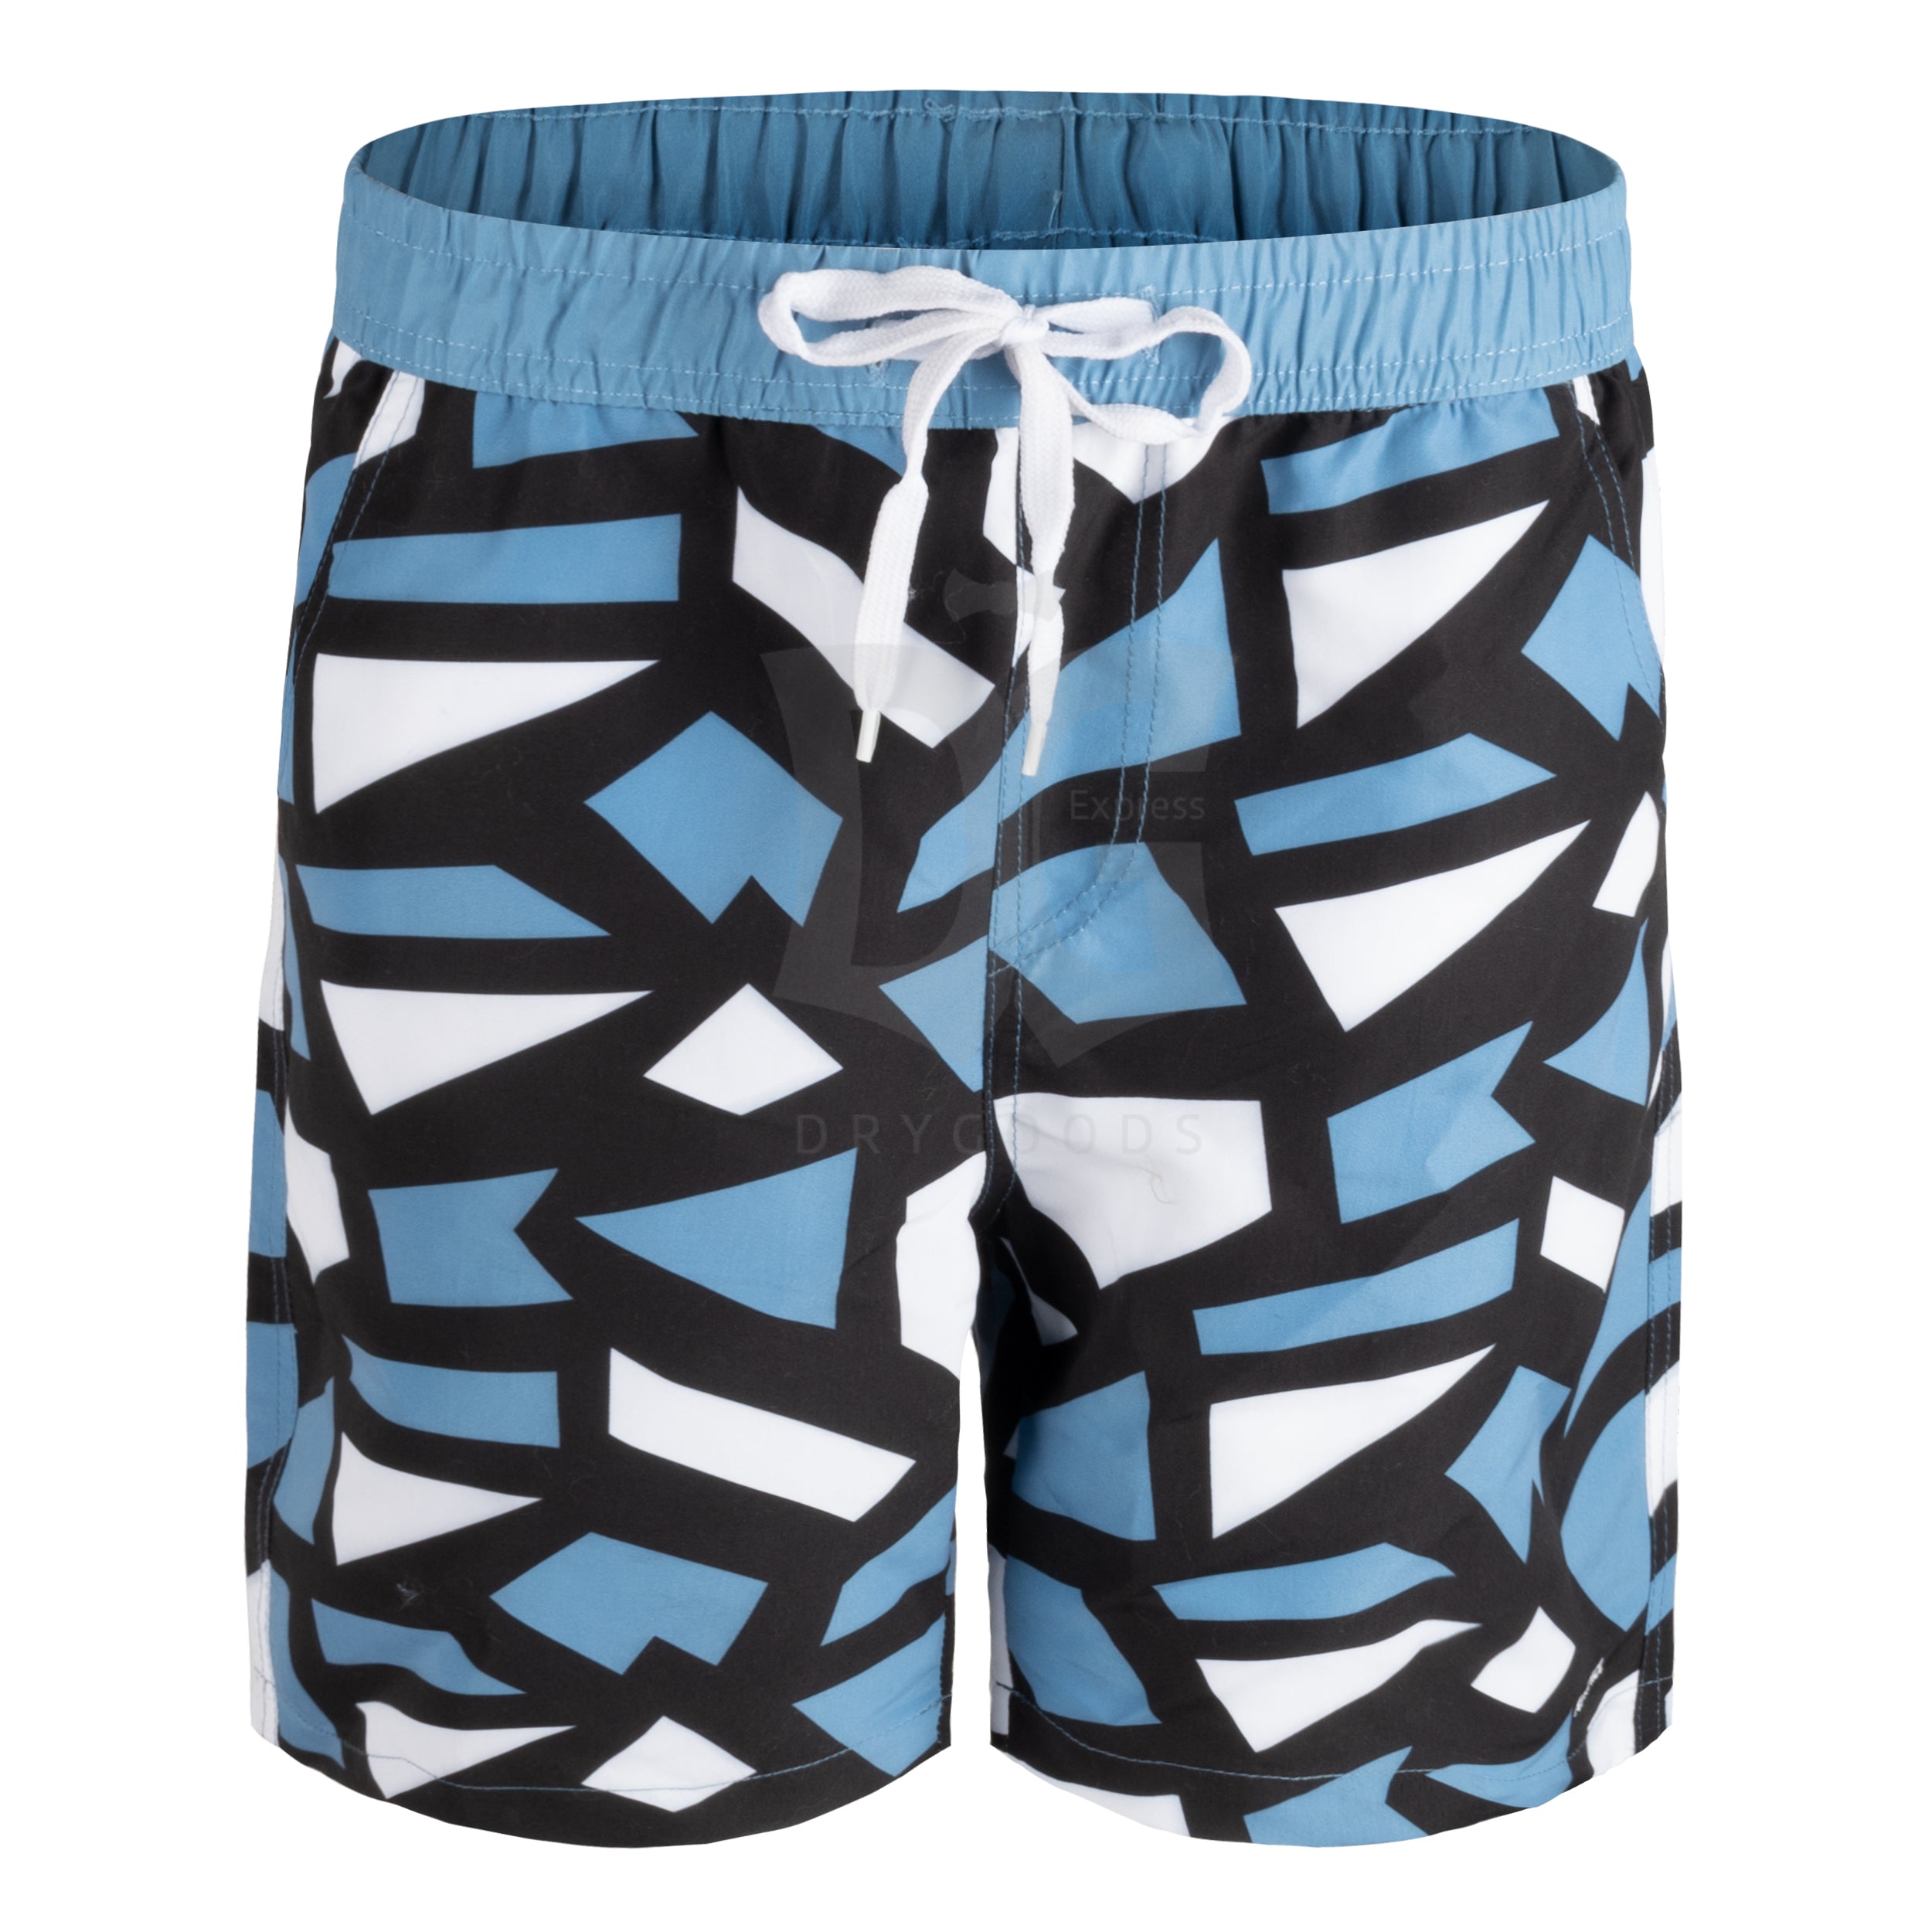 Abstract Boy's Geometric Bathing Suit